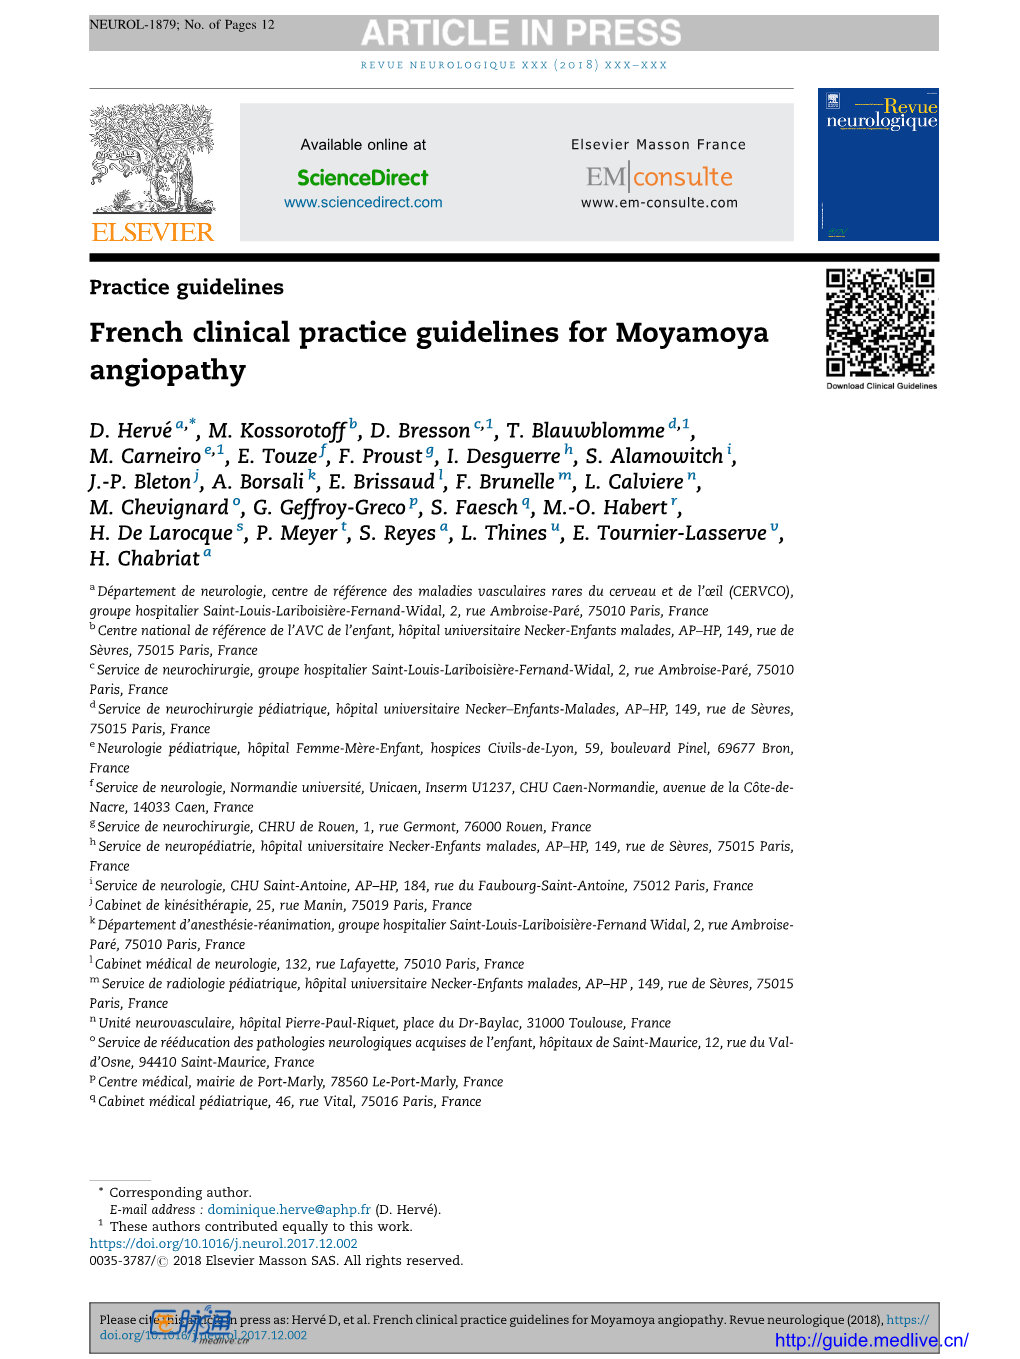 French Clinical Practice Guidelines for Moyamoya Angiopathy